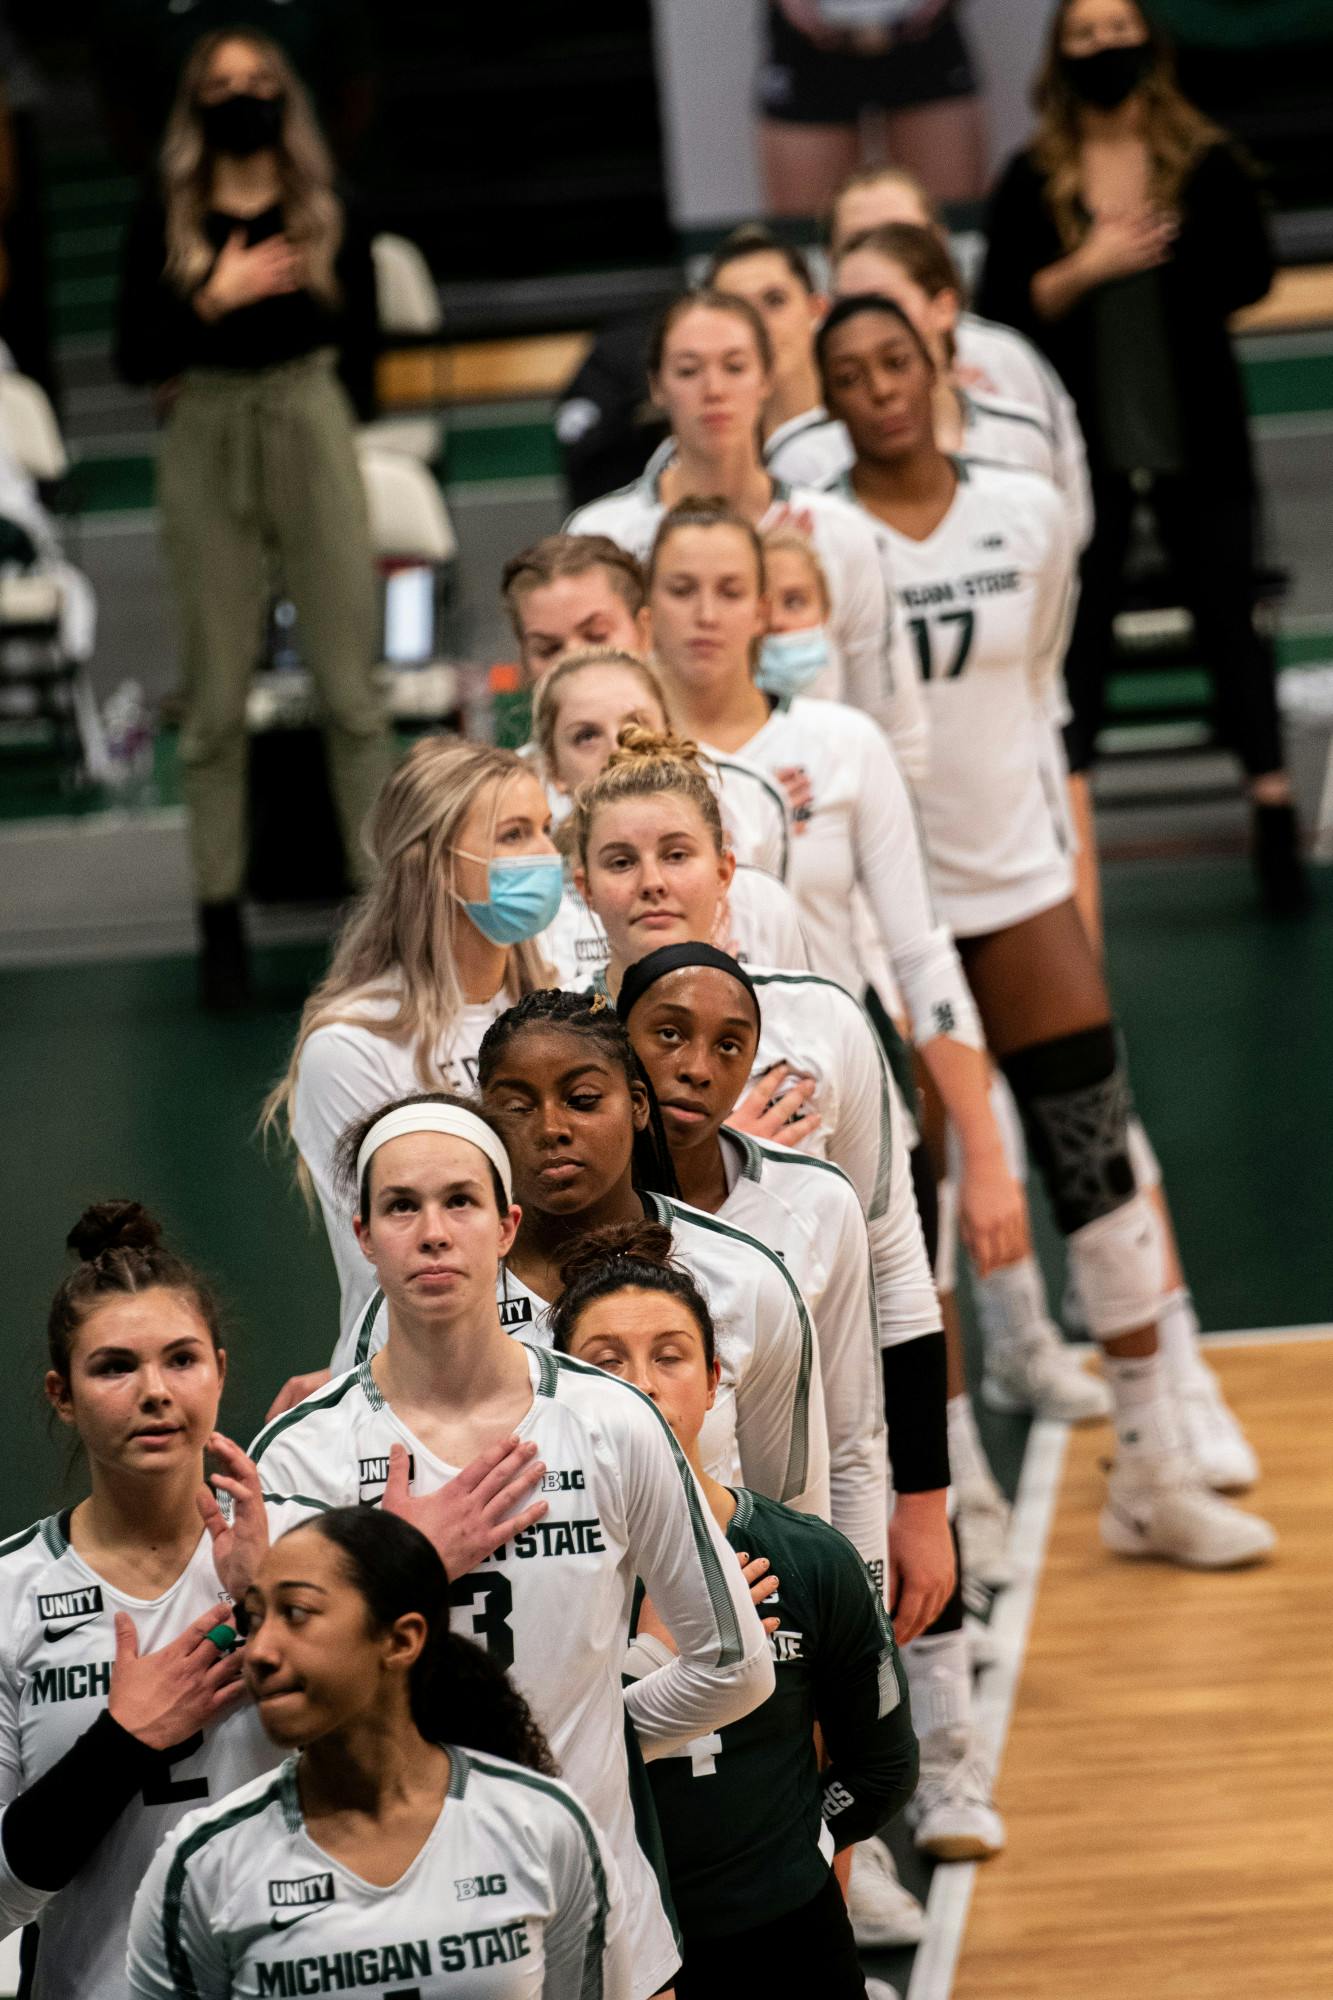 Michigan State Volleyball listens to the national anthem, prior to their loss to Ohio State on Jan. 31, 2021.